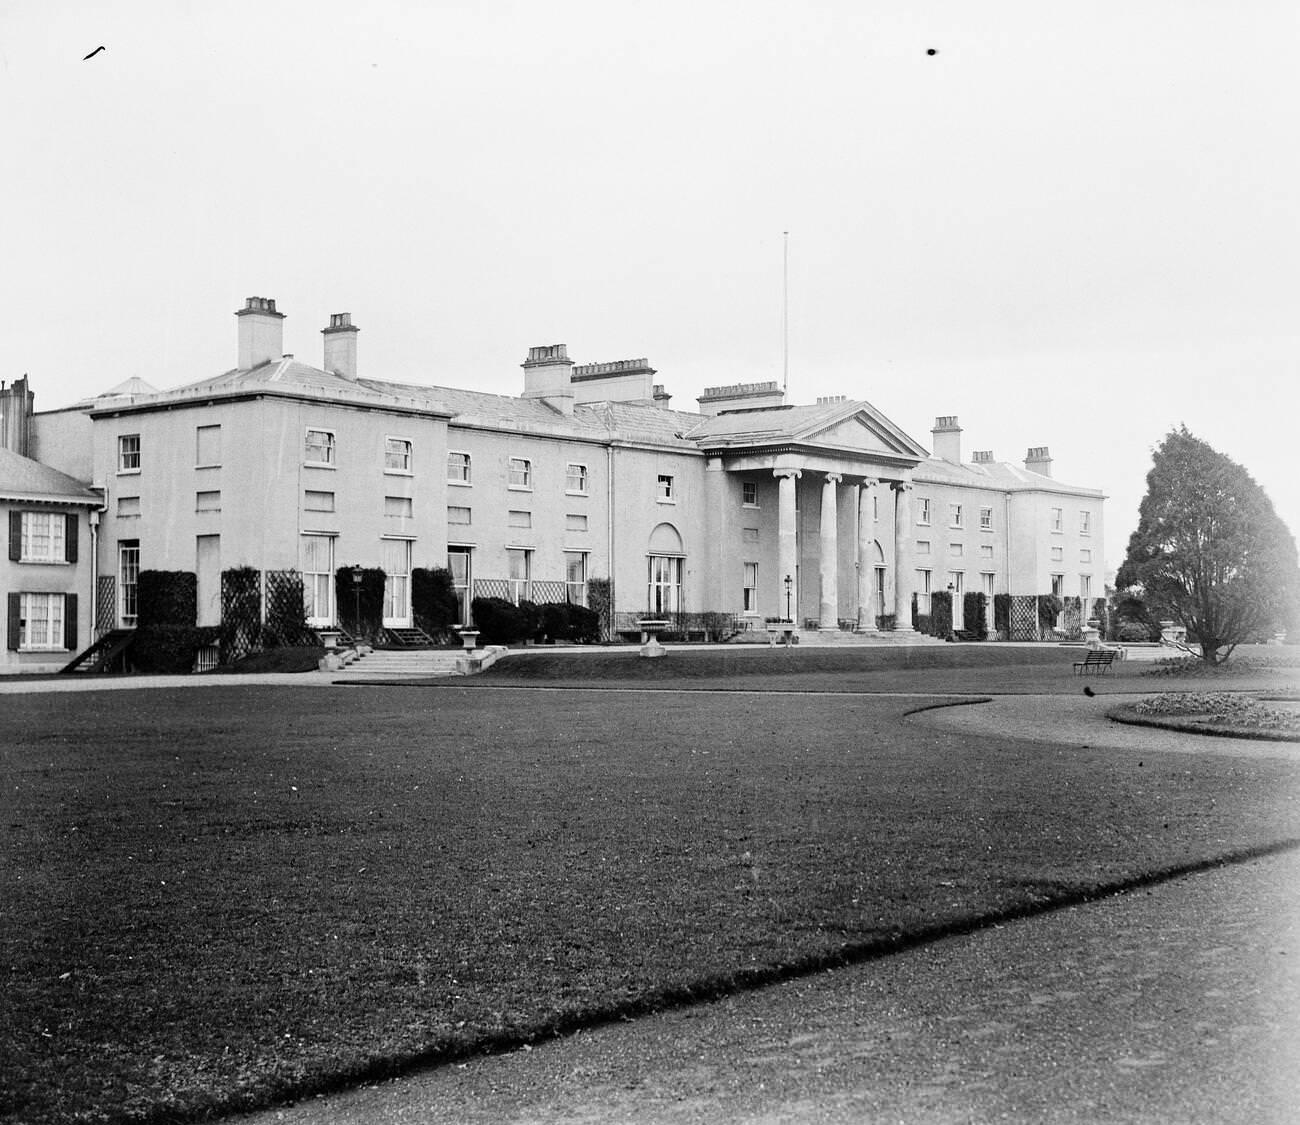 The Irish Governor General's first speech to both houses at the Vice Regal Lodge, Dublin, 1922.